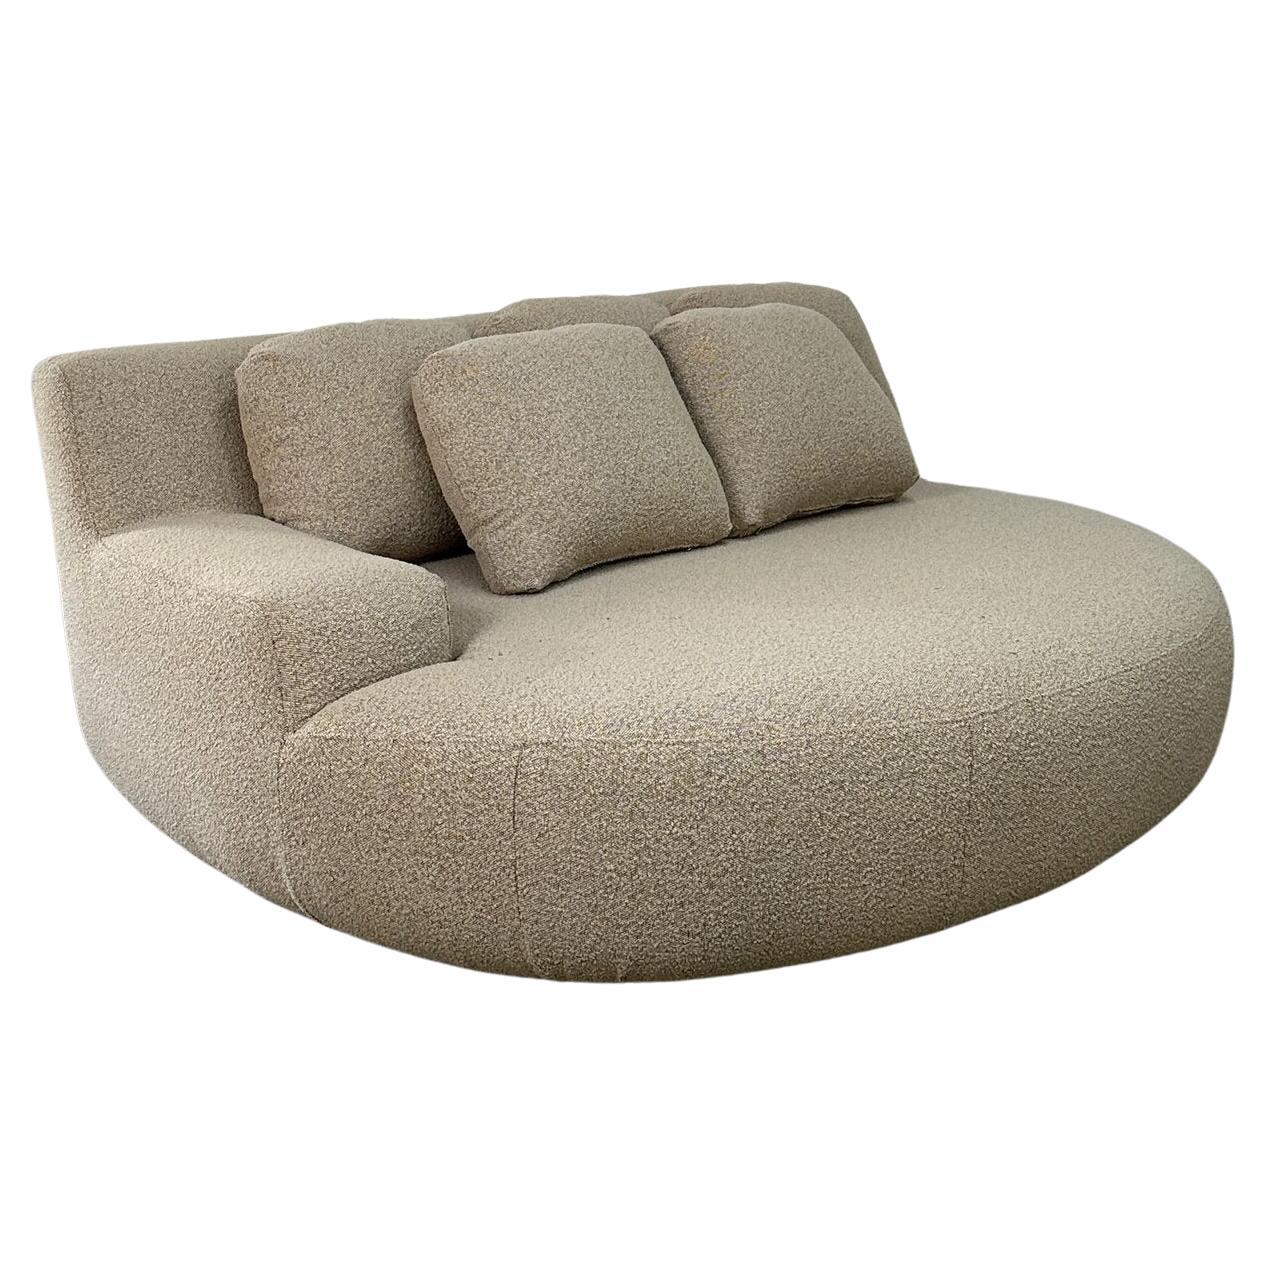 Oversized daybed in beige boucle